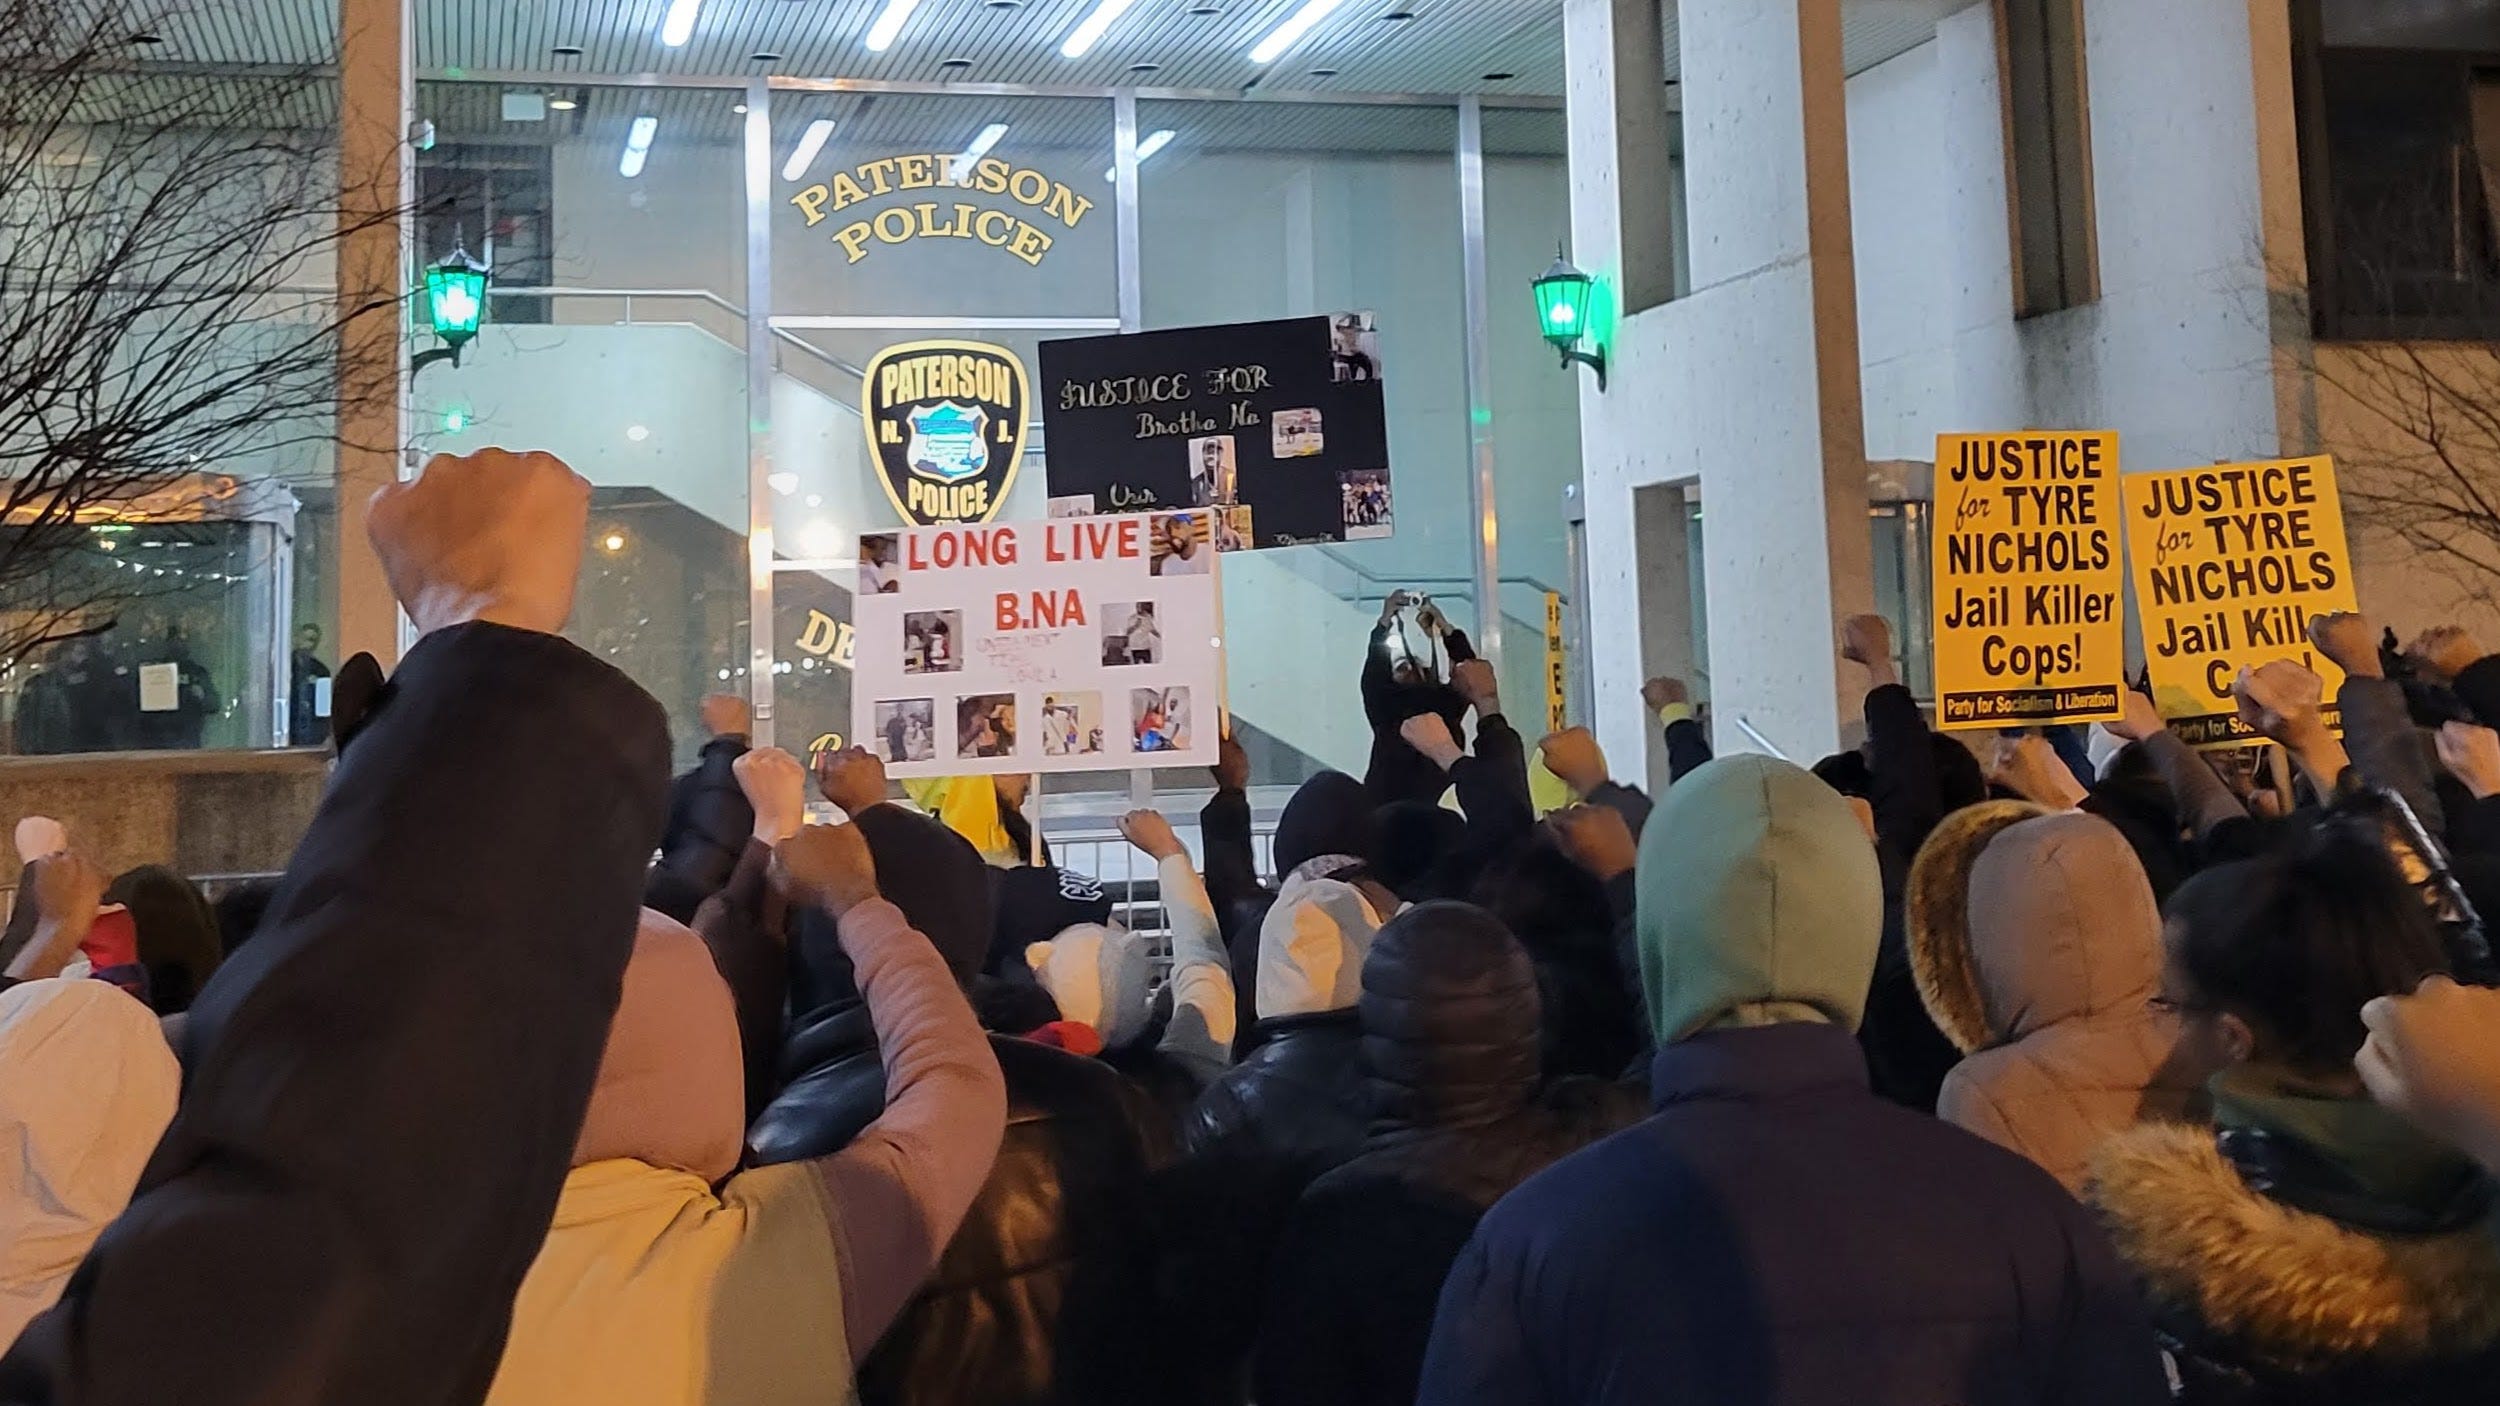 Protesters hold signs supporting Najee Seabrooks and Tyre Nichols while holding their fists in the air in front of the Paterson Police Department